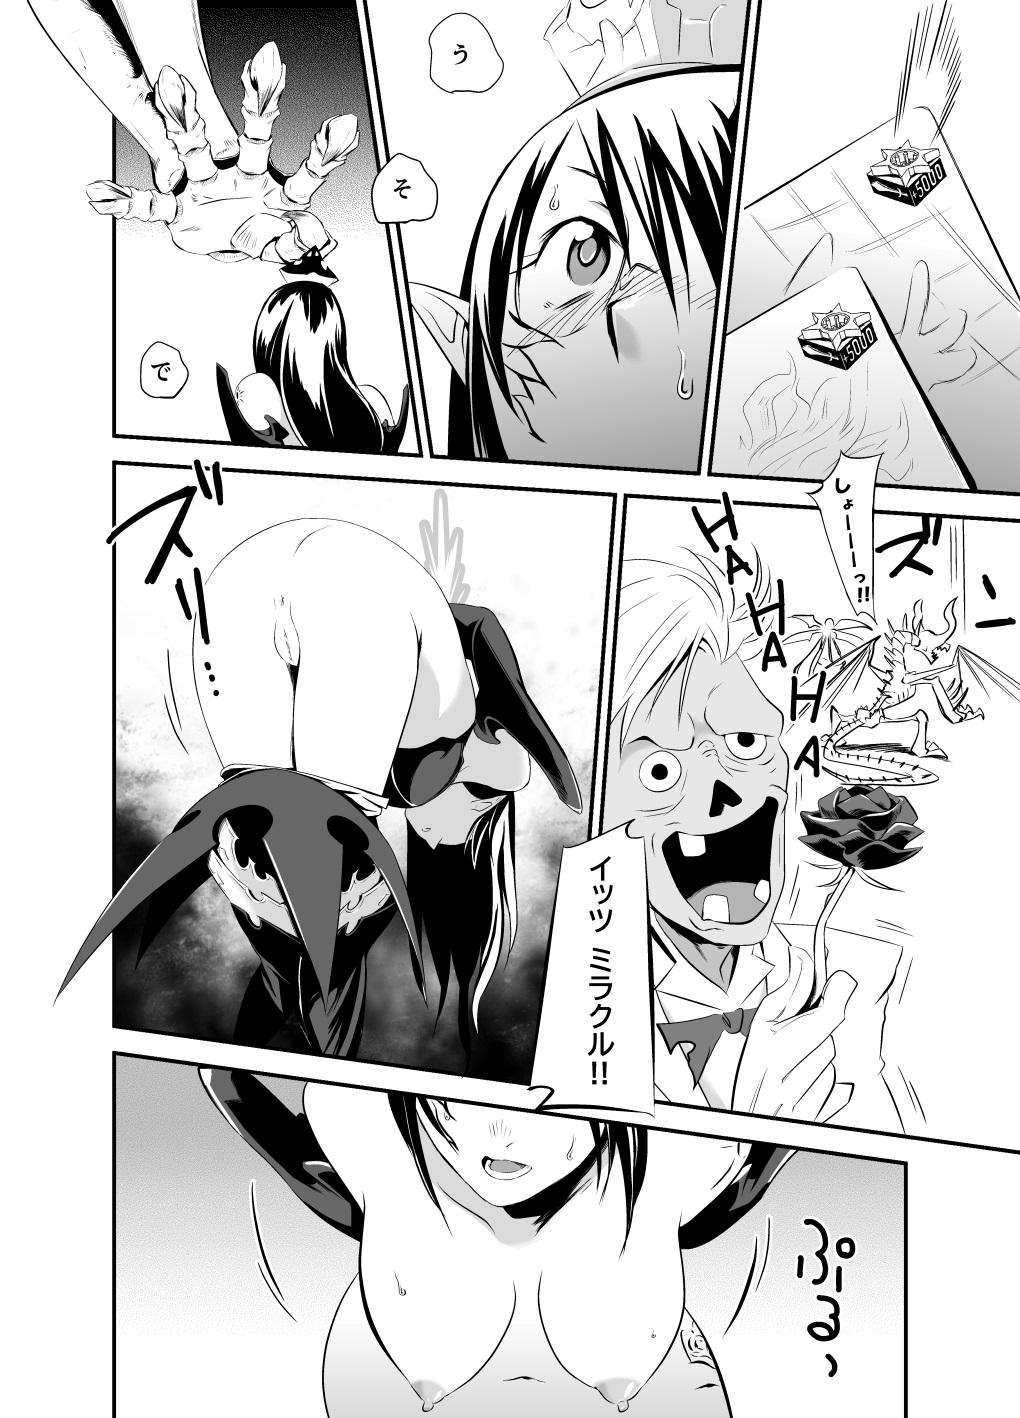 Audition 3rd Ride - Cardfight vanguard Tan - Page 8